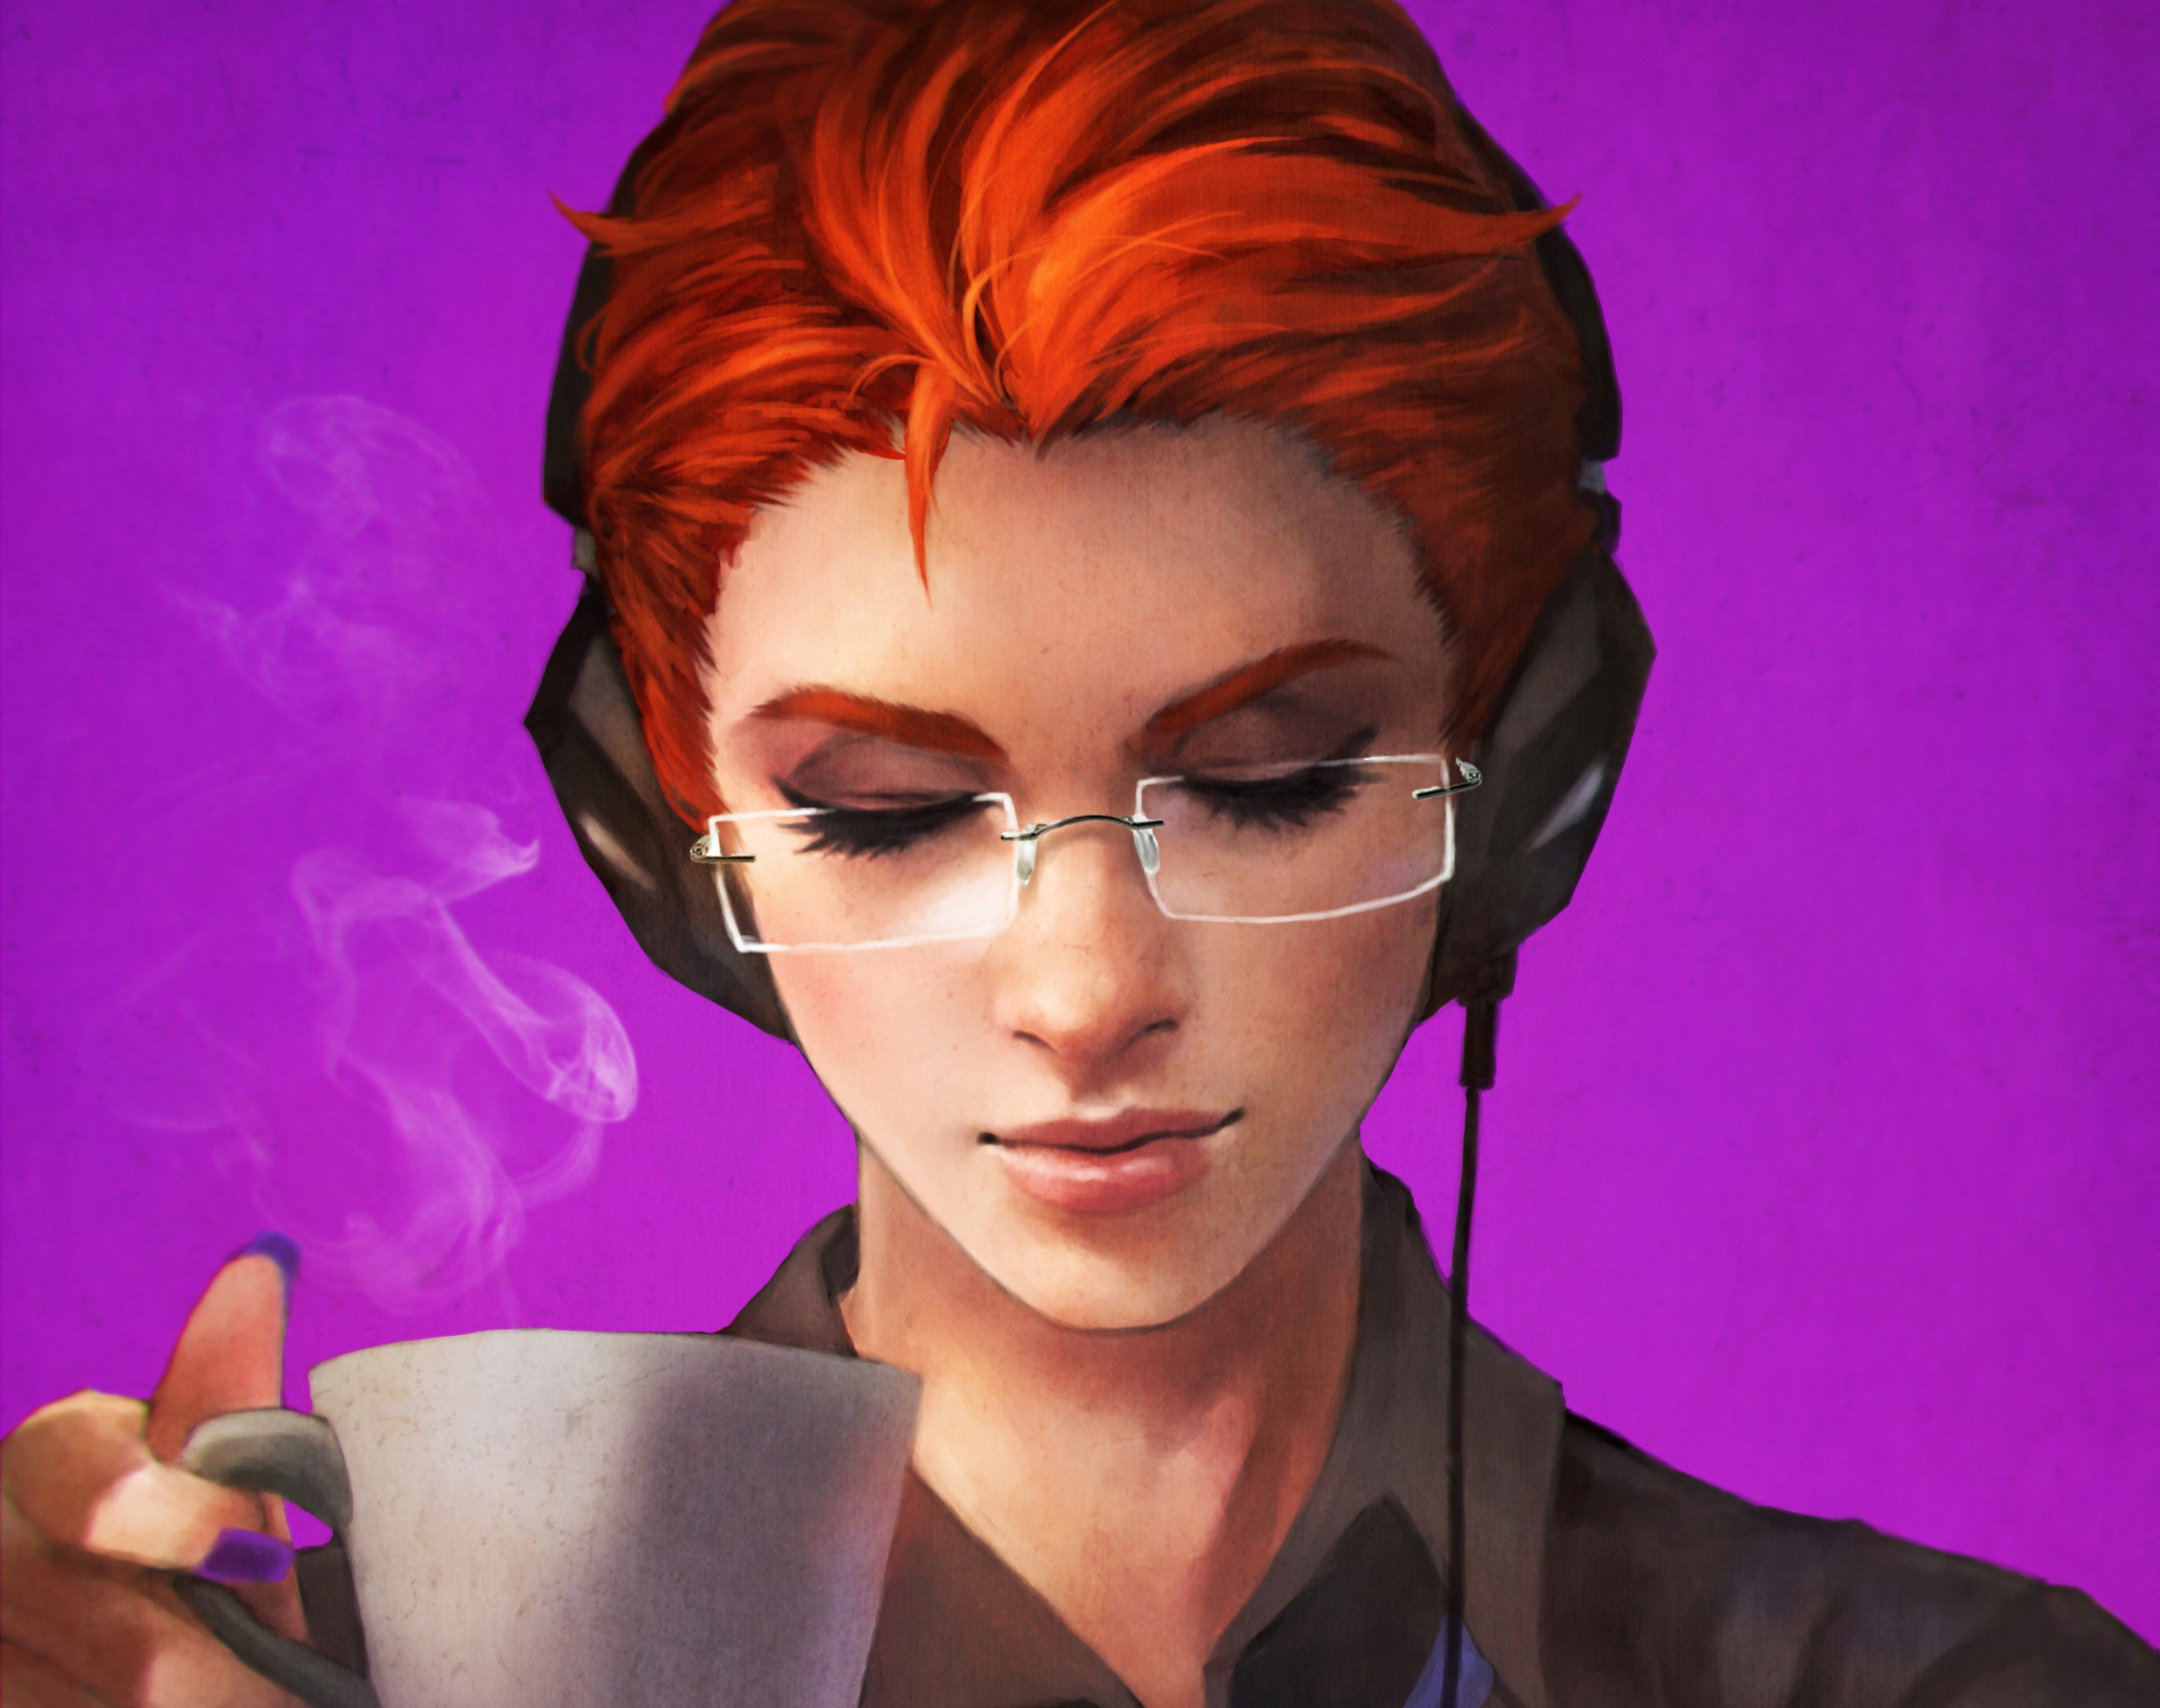 video game, overwatch, cup, face, glasses, moira (overwatch), red hair